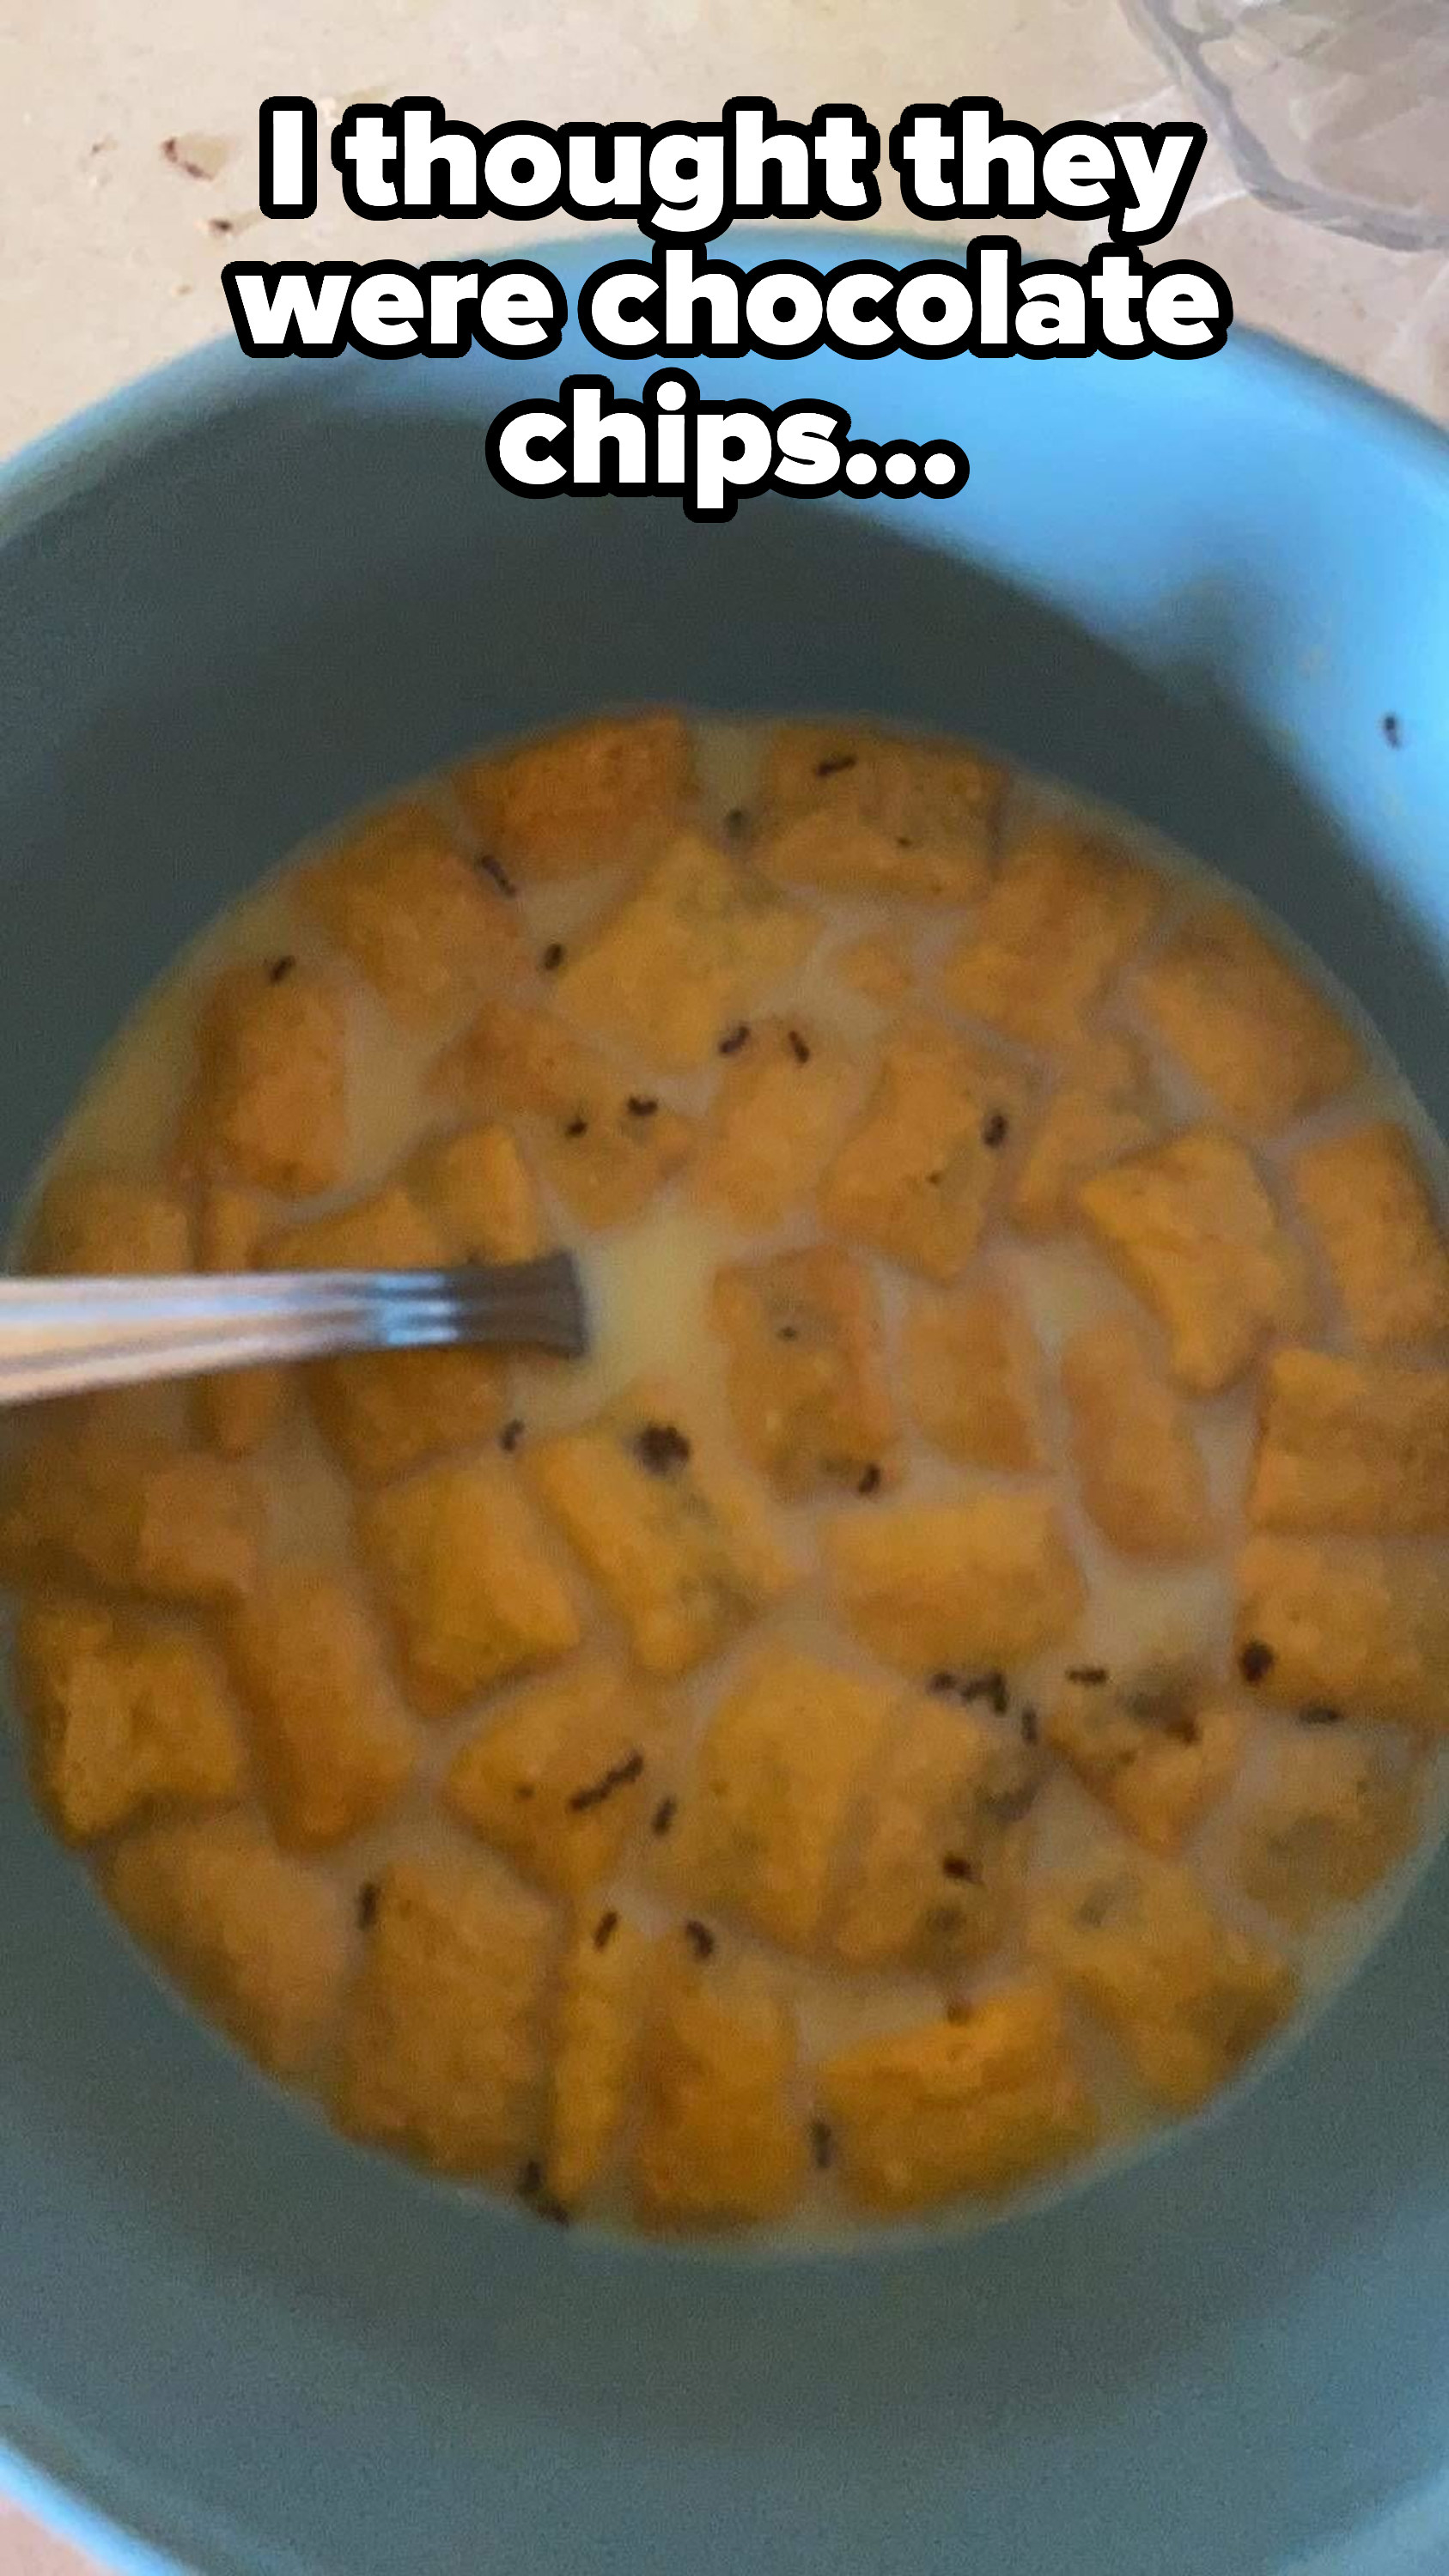 Little insects in a bowl of cereal with milk